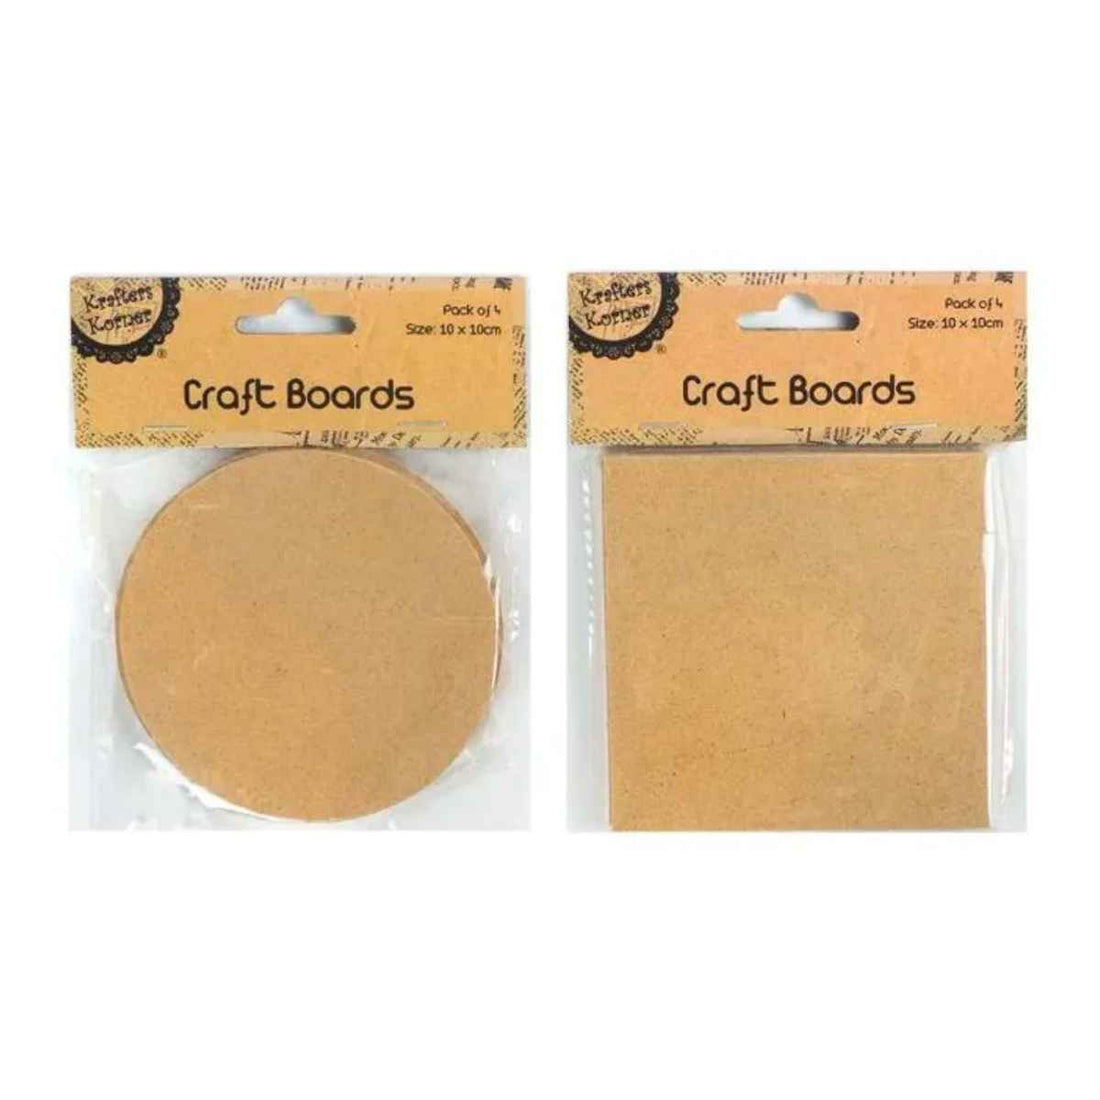 Pack of 4 MDF Craft Boards